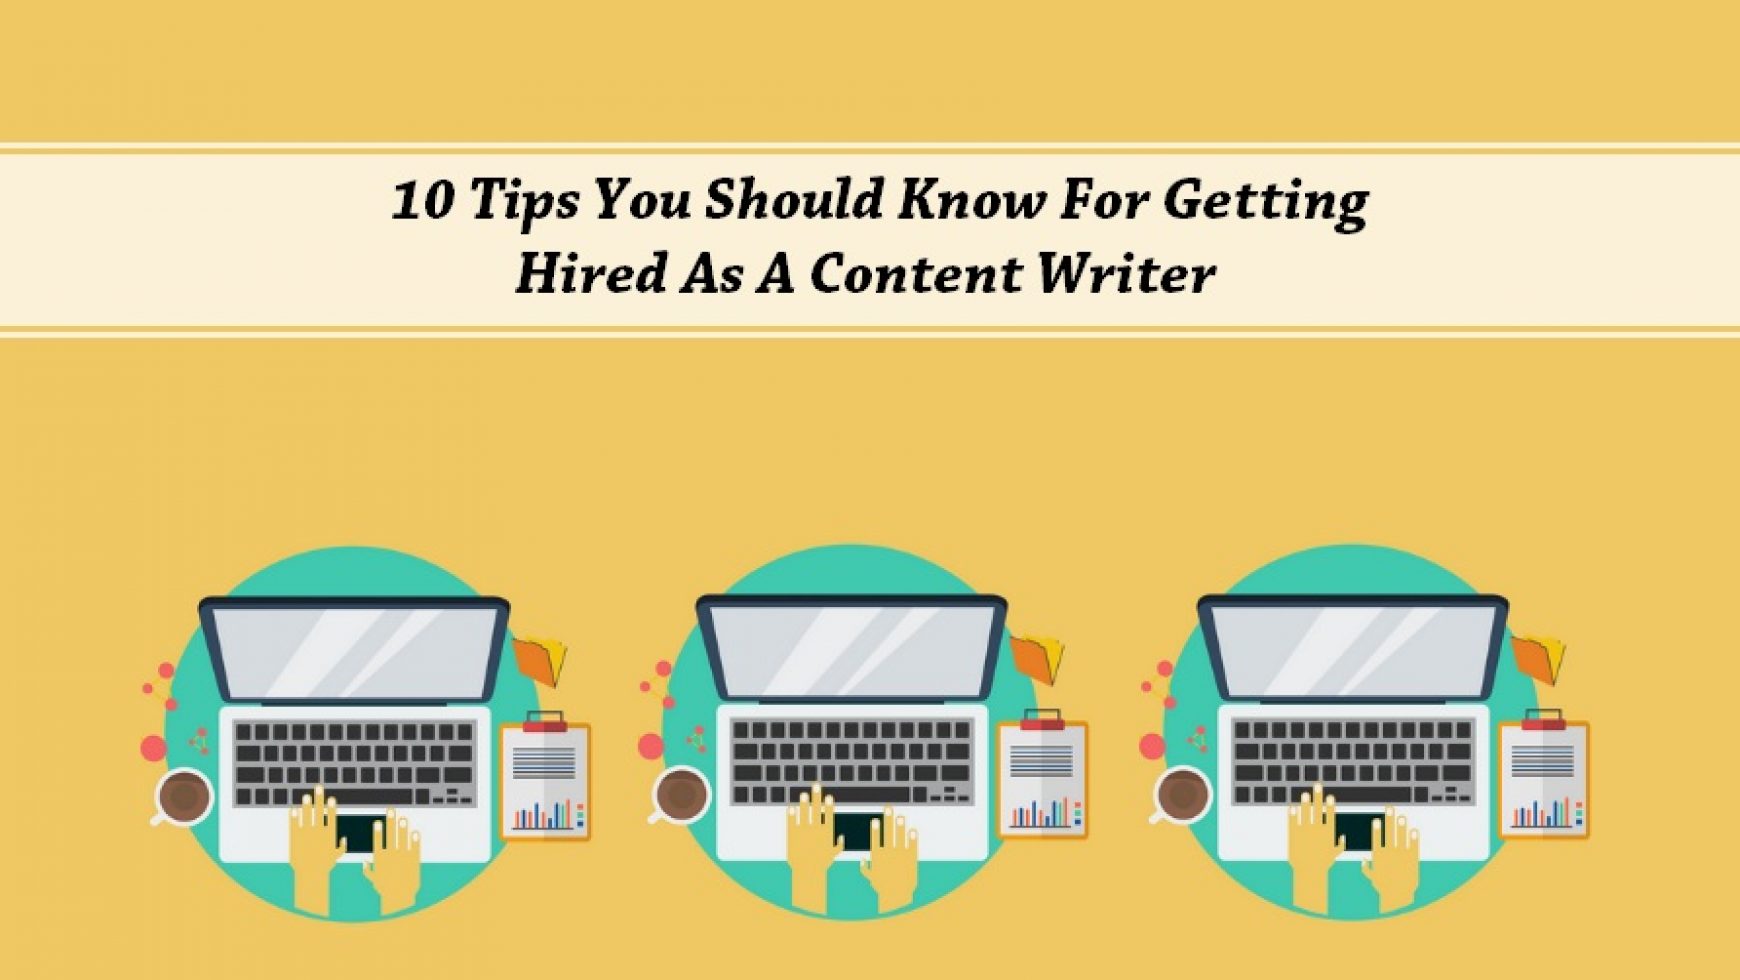 10 Tips You Should Know For Getting Hired As A Content Writer